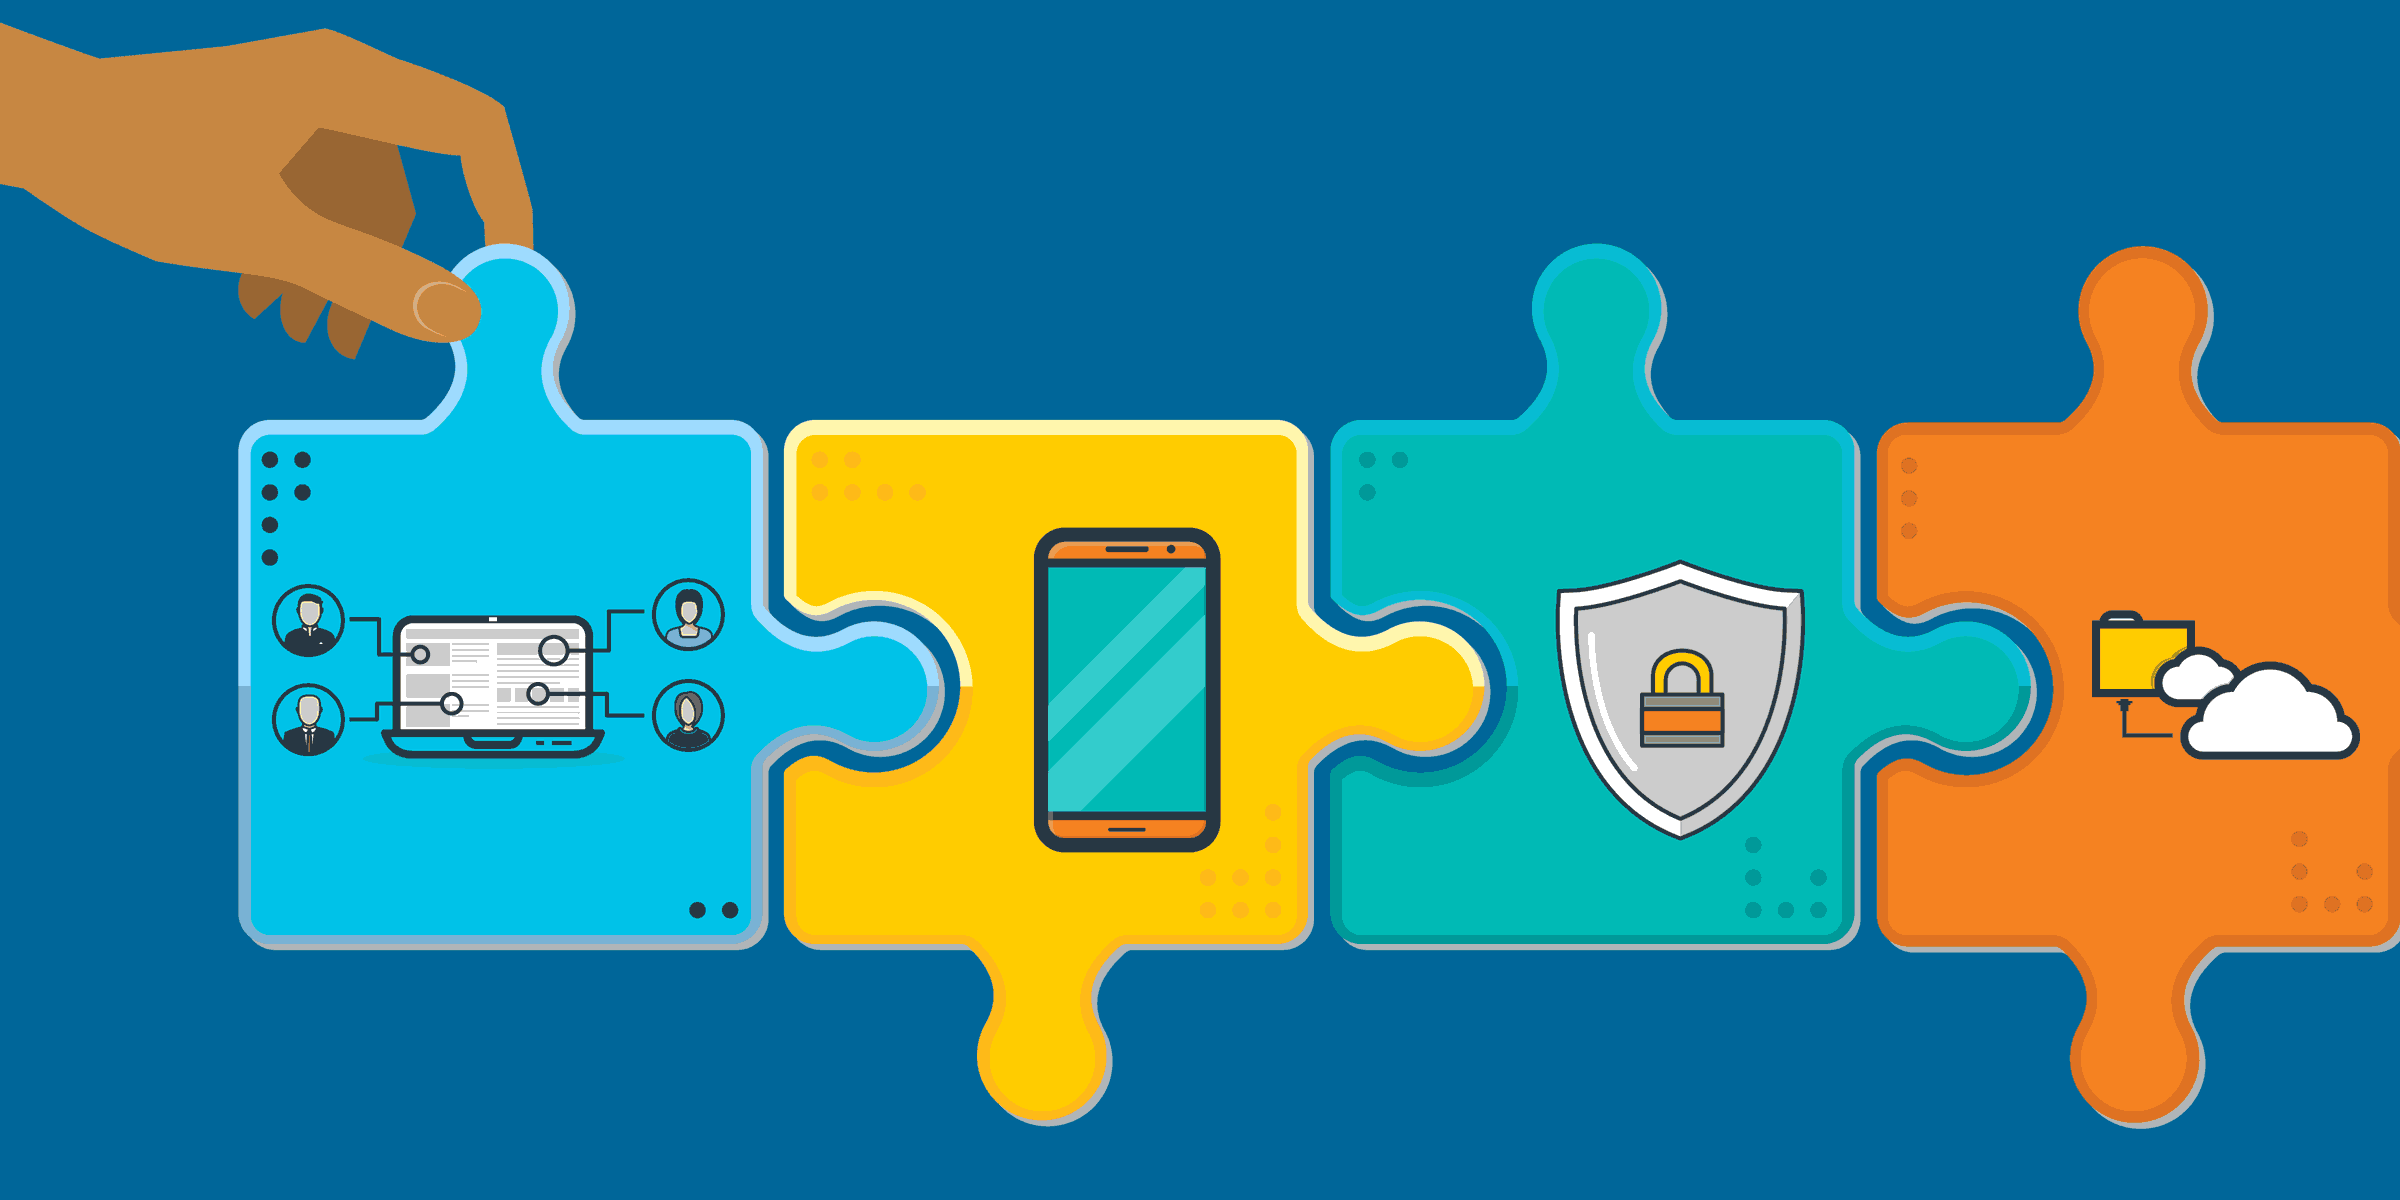 illustration of four puzzle pieces with remote workers, a mobile phone, security software, and cloud computing on them, representing the future of work for nonprofits